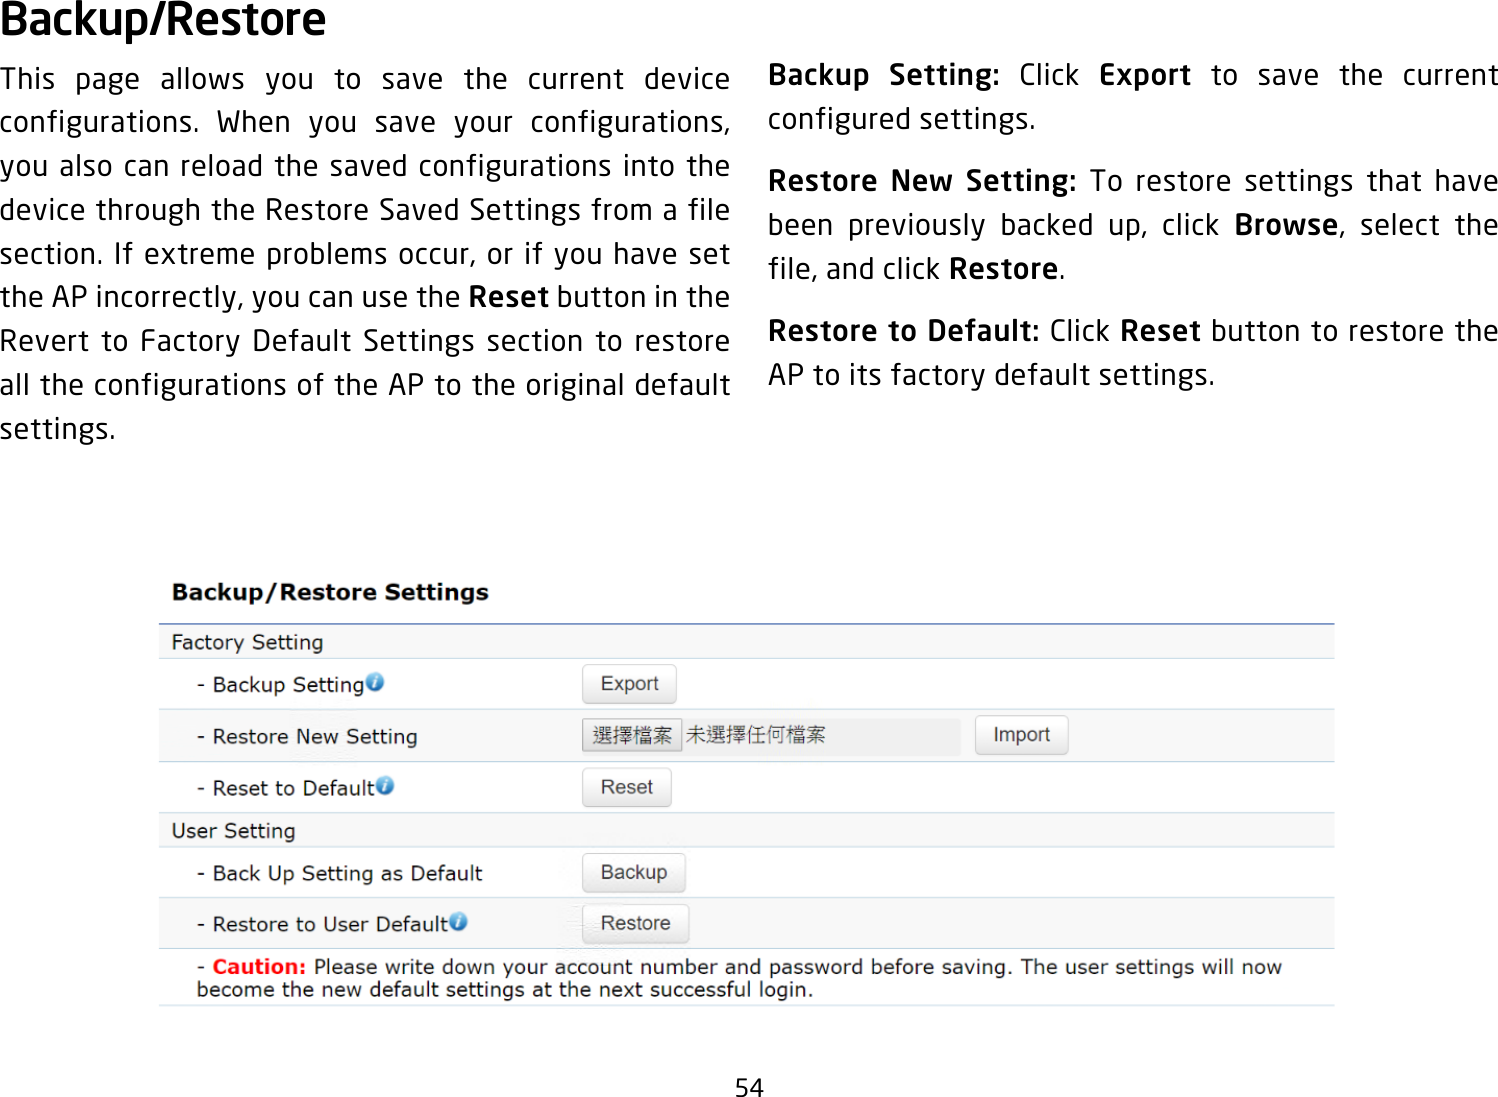 54Backup/RestoreThis page allows you to save the current device configurations. When you save your configurations, you also can reload the saved configurations into the device through the Restore Saved Settings from a file section. If extreme problems occur, or if you have set the AP incorrectly, you can use the Reset button in the Revert to Factory Default Settings section to restore all the configurations of the AP to the original default settings.Backup Setting: Click Export to save the current configured settings.Restore New Setting: To restore settings that have been previously backed up, click Browse, select the file, and click Restore.Restore to Default: Click Reset button to restore the AP to its factory default settings.